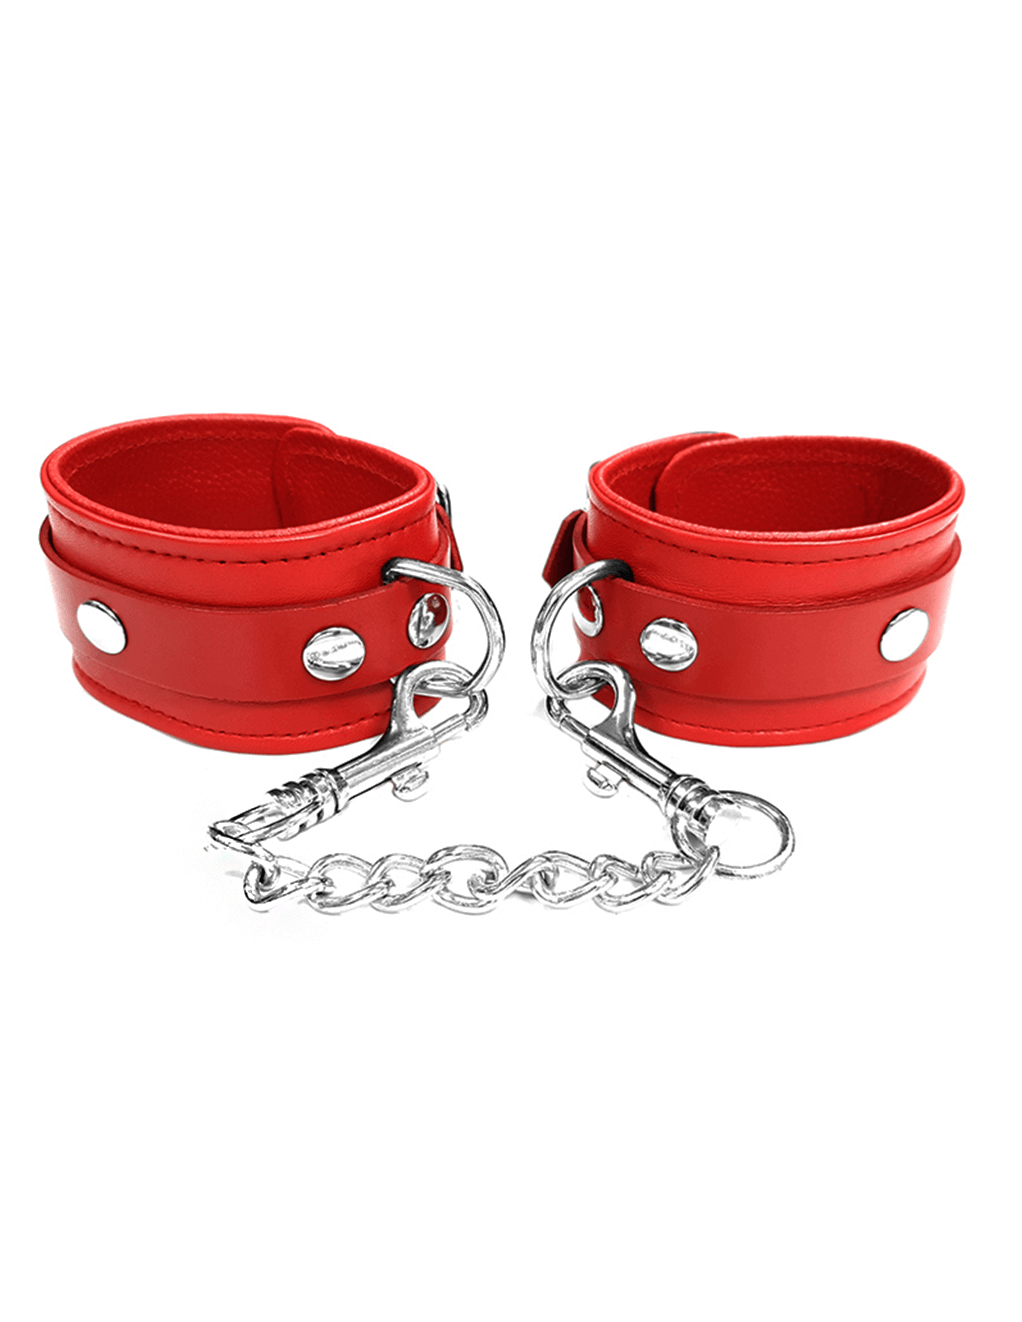 Rouge Leather Wrist Cuffs - Red - Main